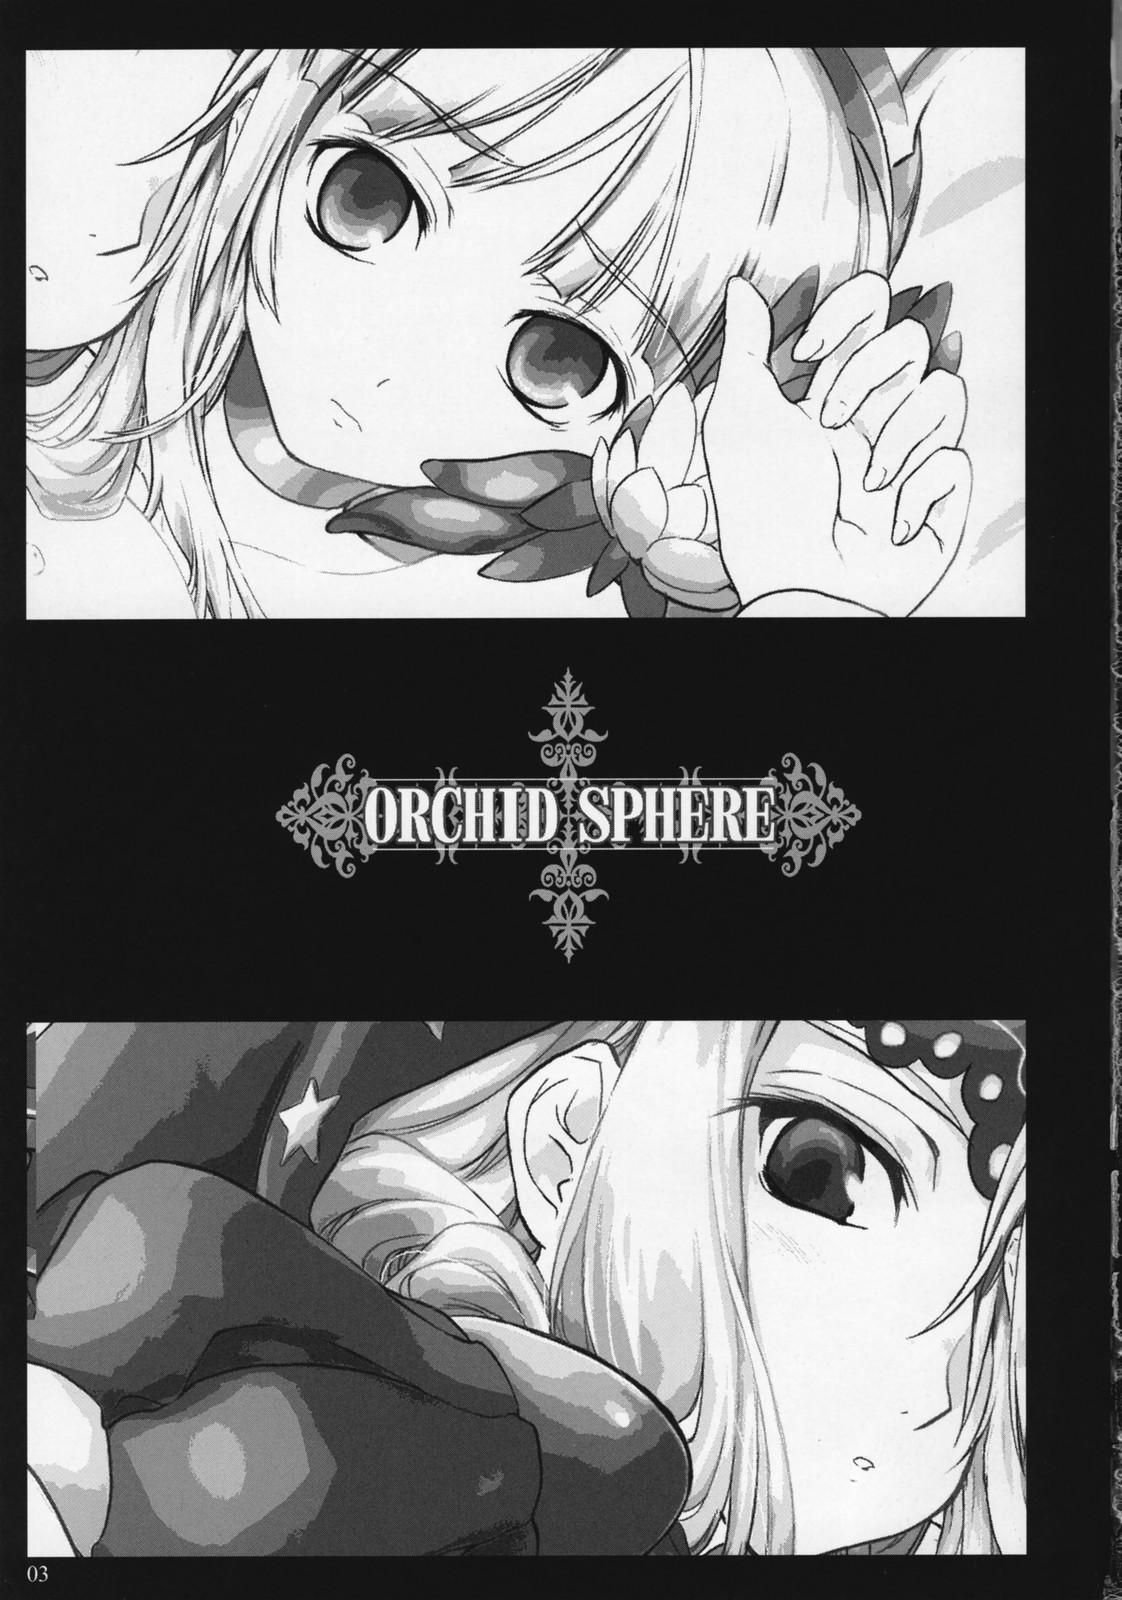 Teenager Orchid Sphere - Odin sphere Hymen - Page 2